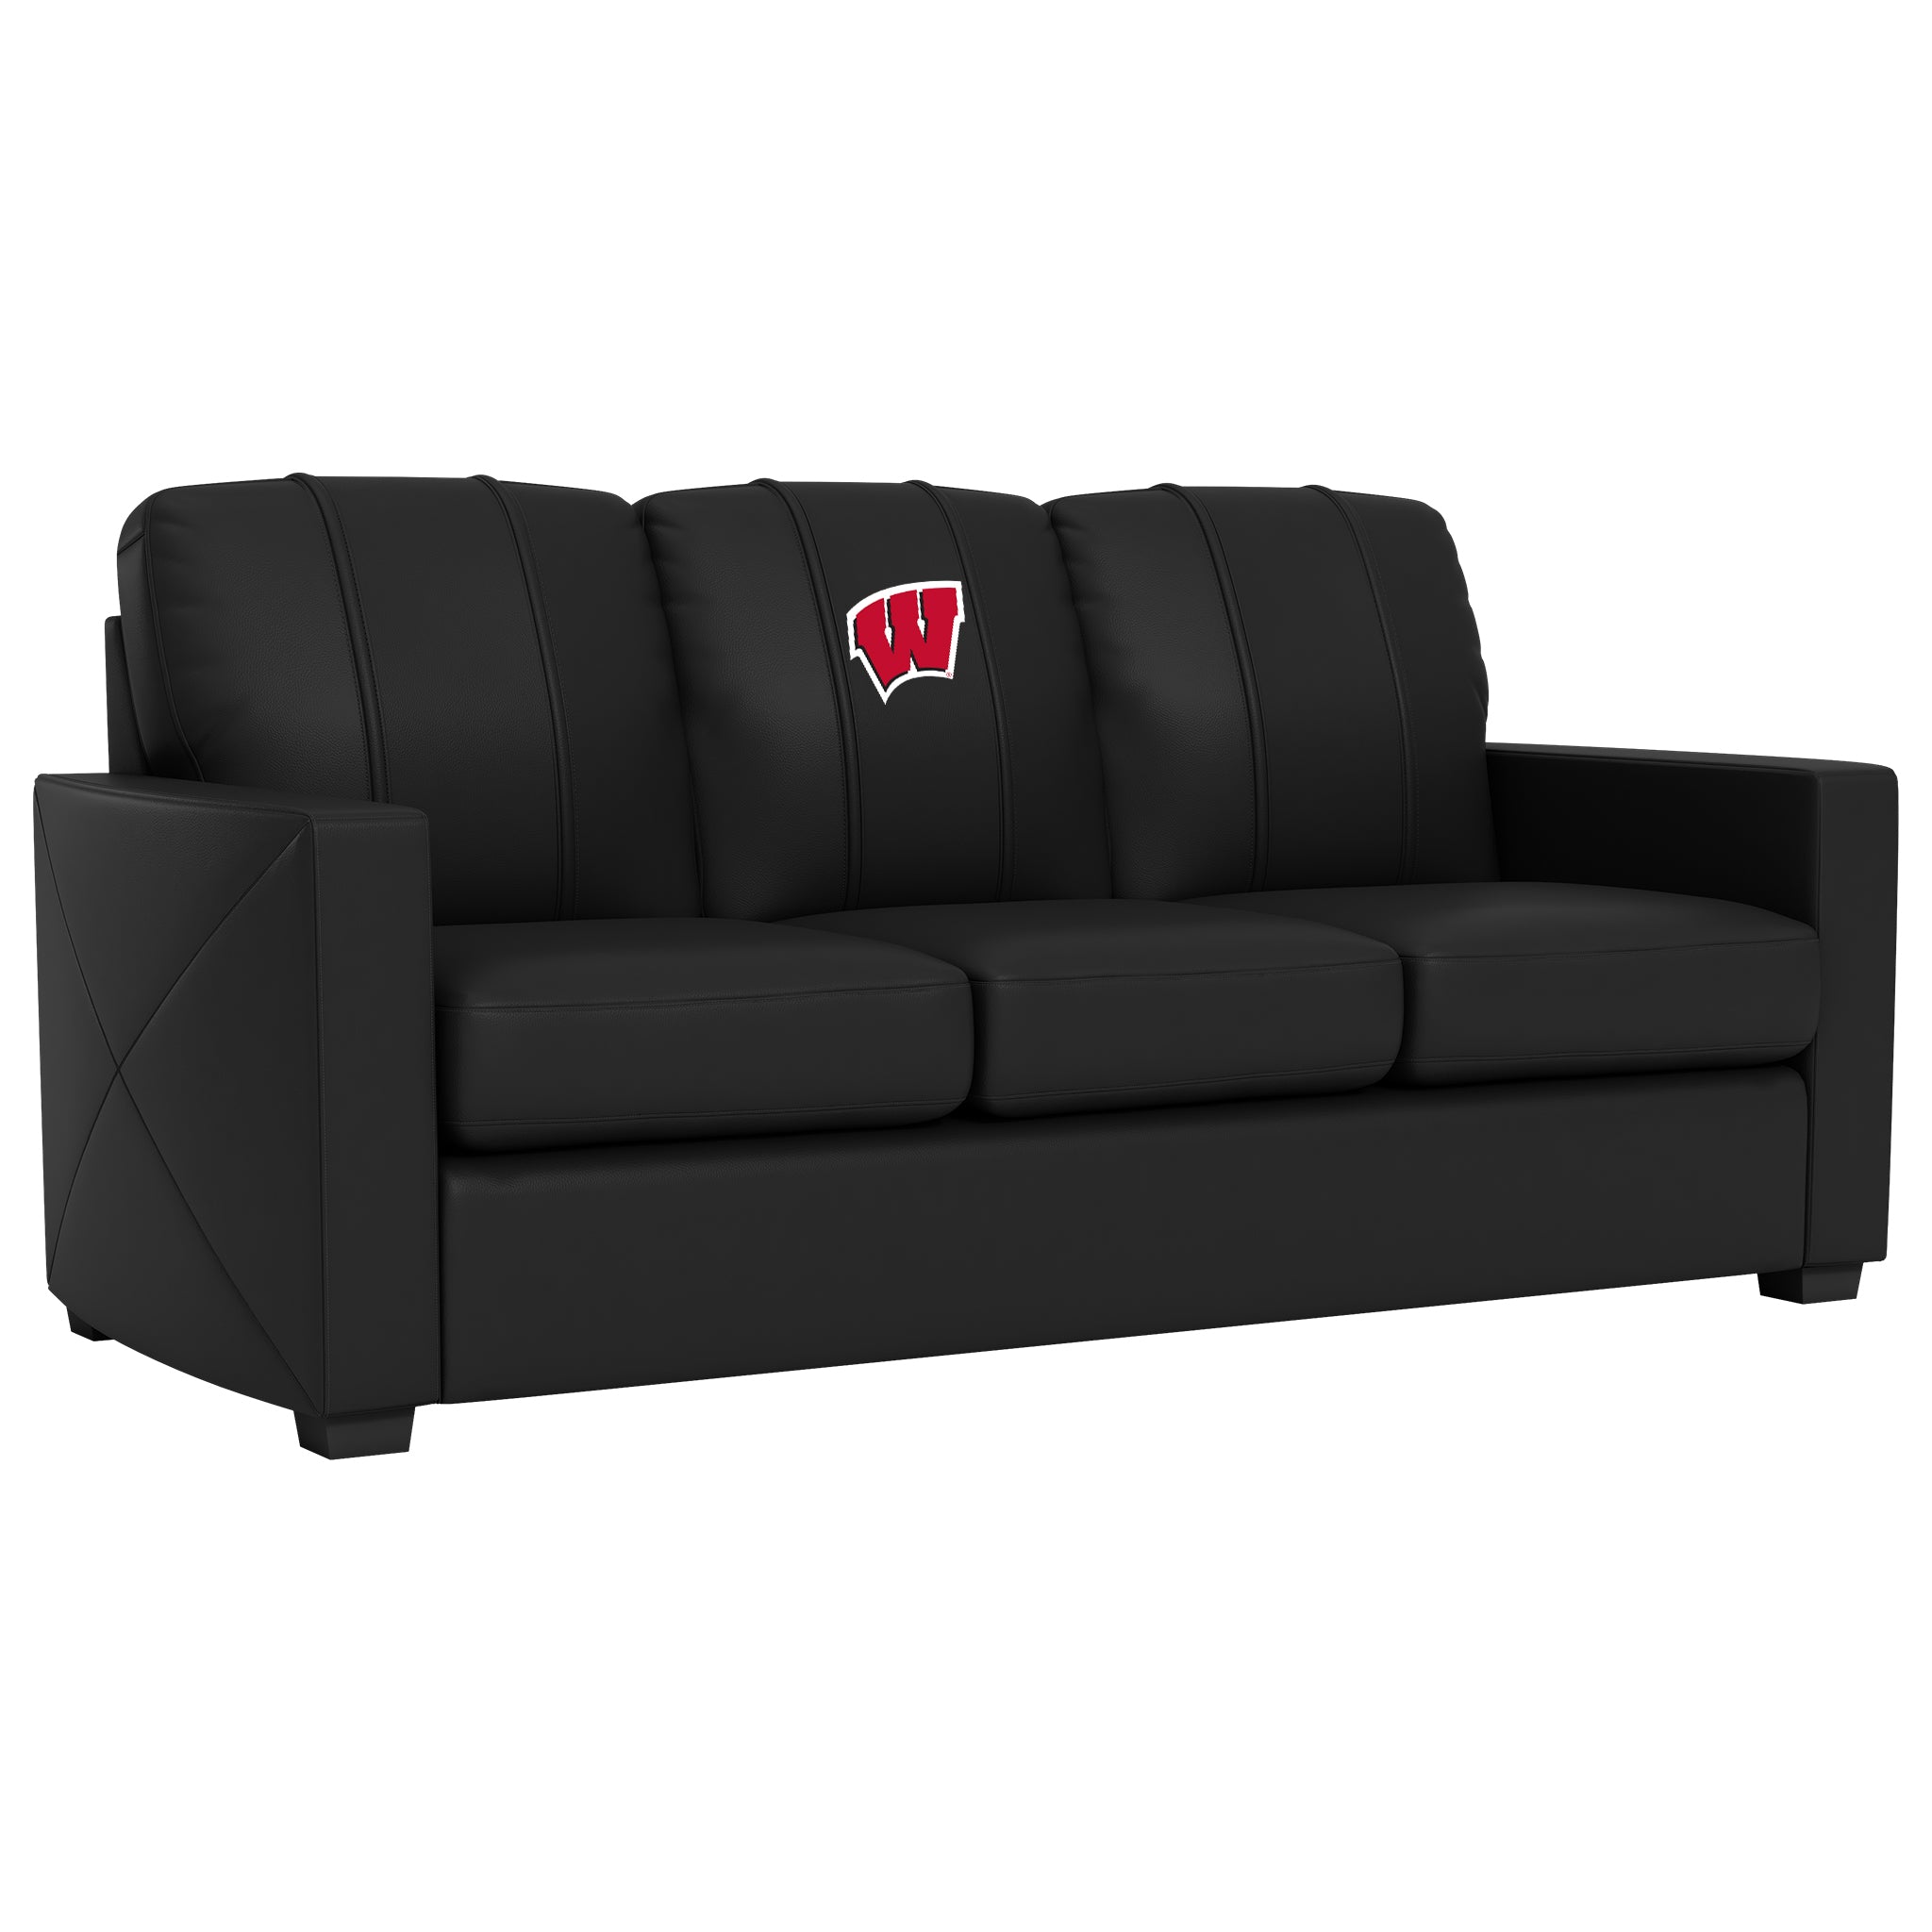 Wisconsin Badgers Silver Sofa with Wisconsin Badgers Logo